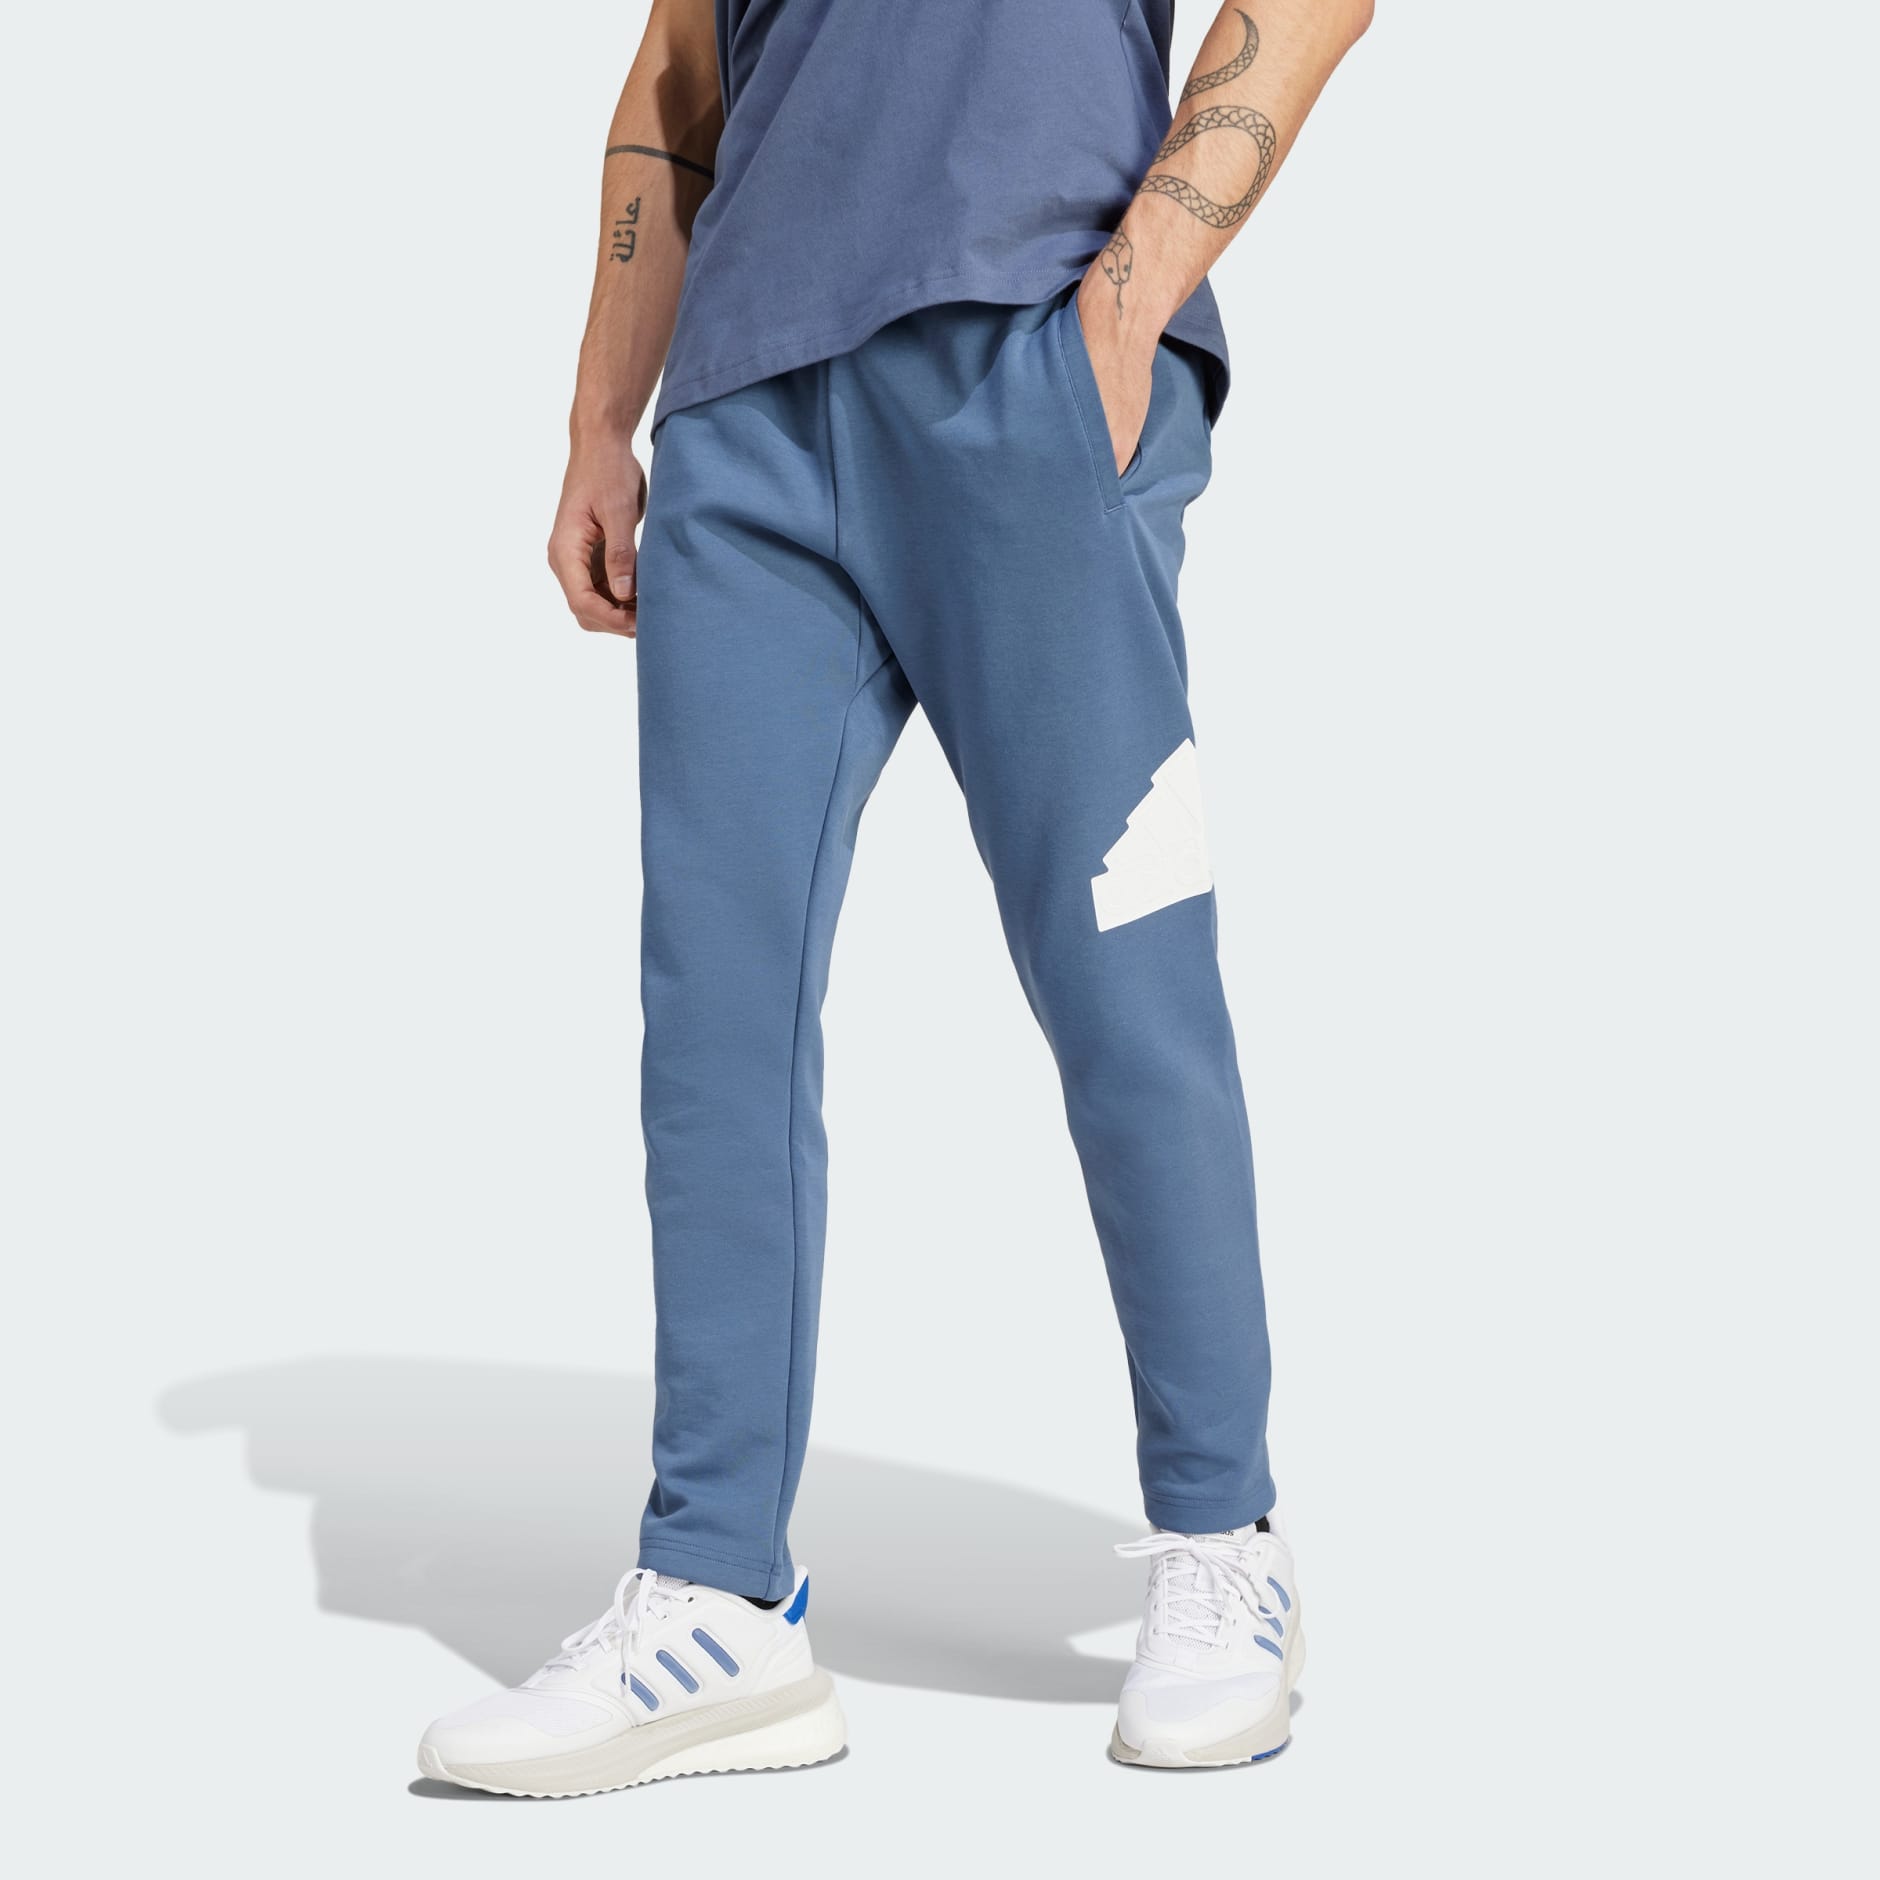 ADIDAS Men's M Bl Q2 7/8 Pt Pants (He4308-S, Legend Ink, S) : Amazon.in:  Clothing & Accessories